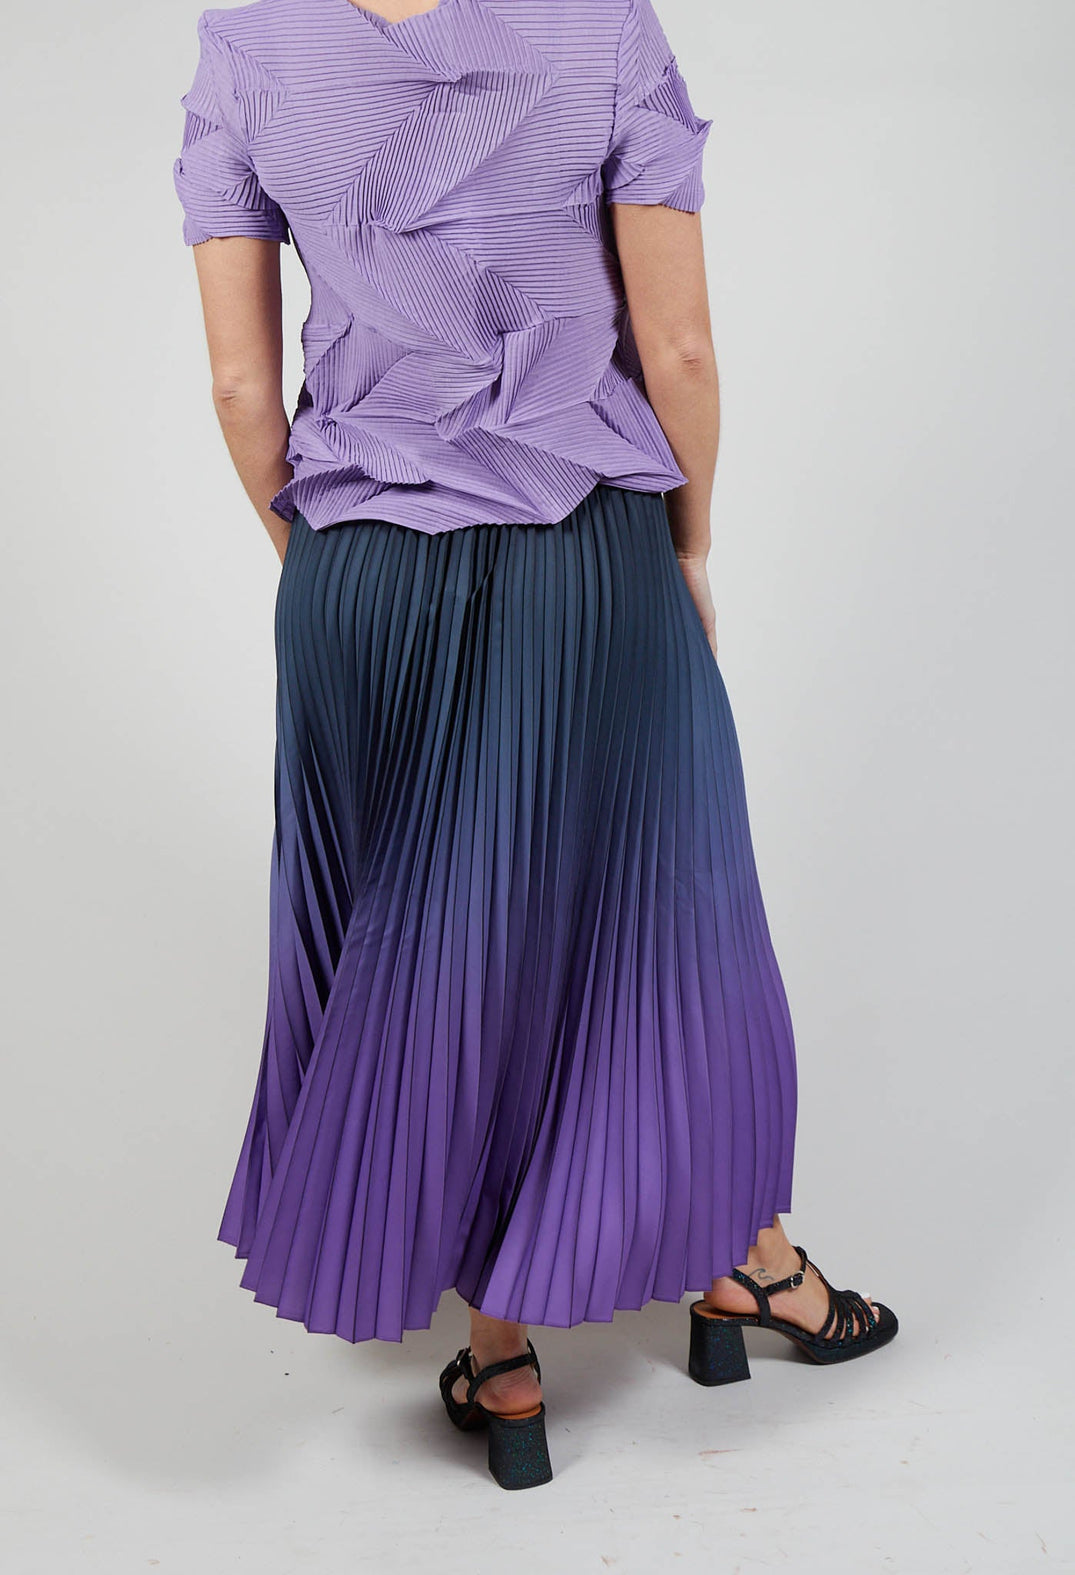 Boxy Skirt in Blueberry and Lavender